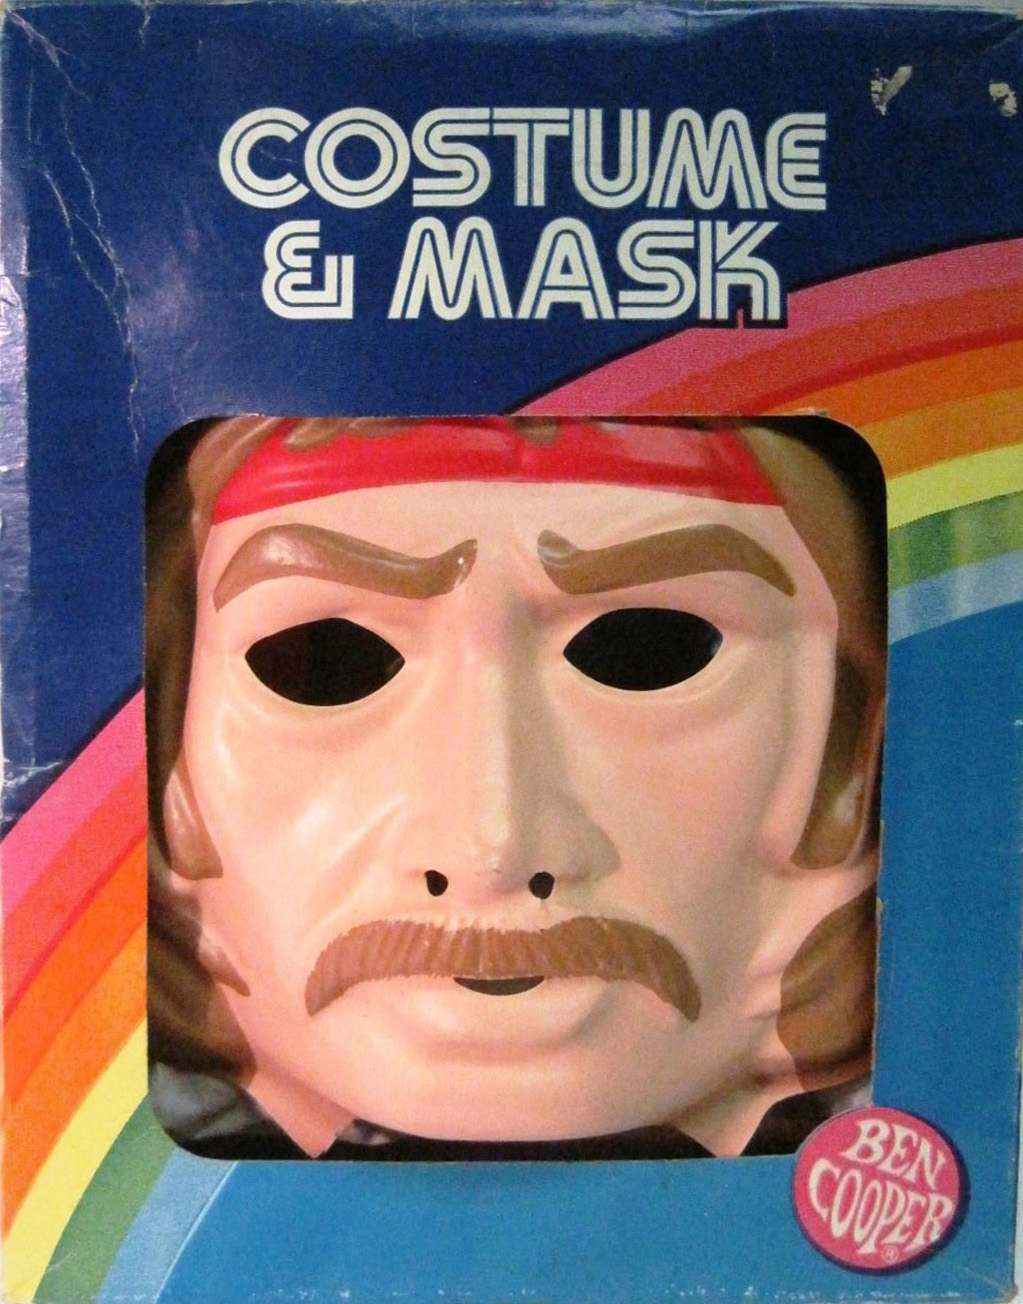 These scare '80s kids even now.